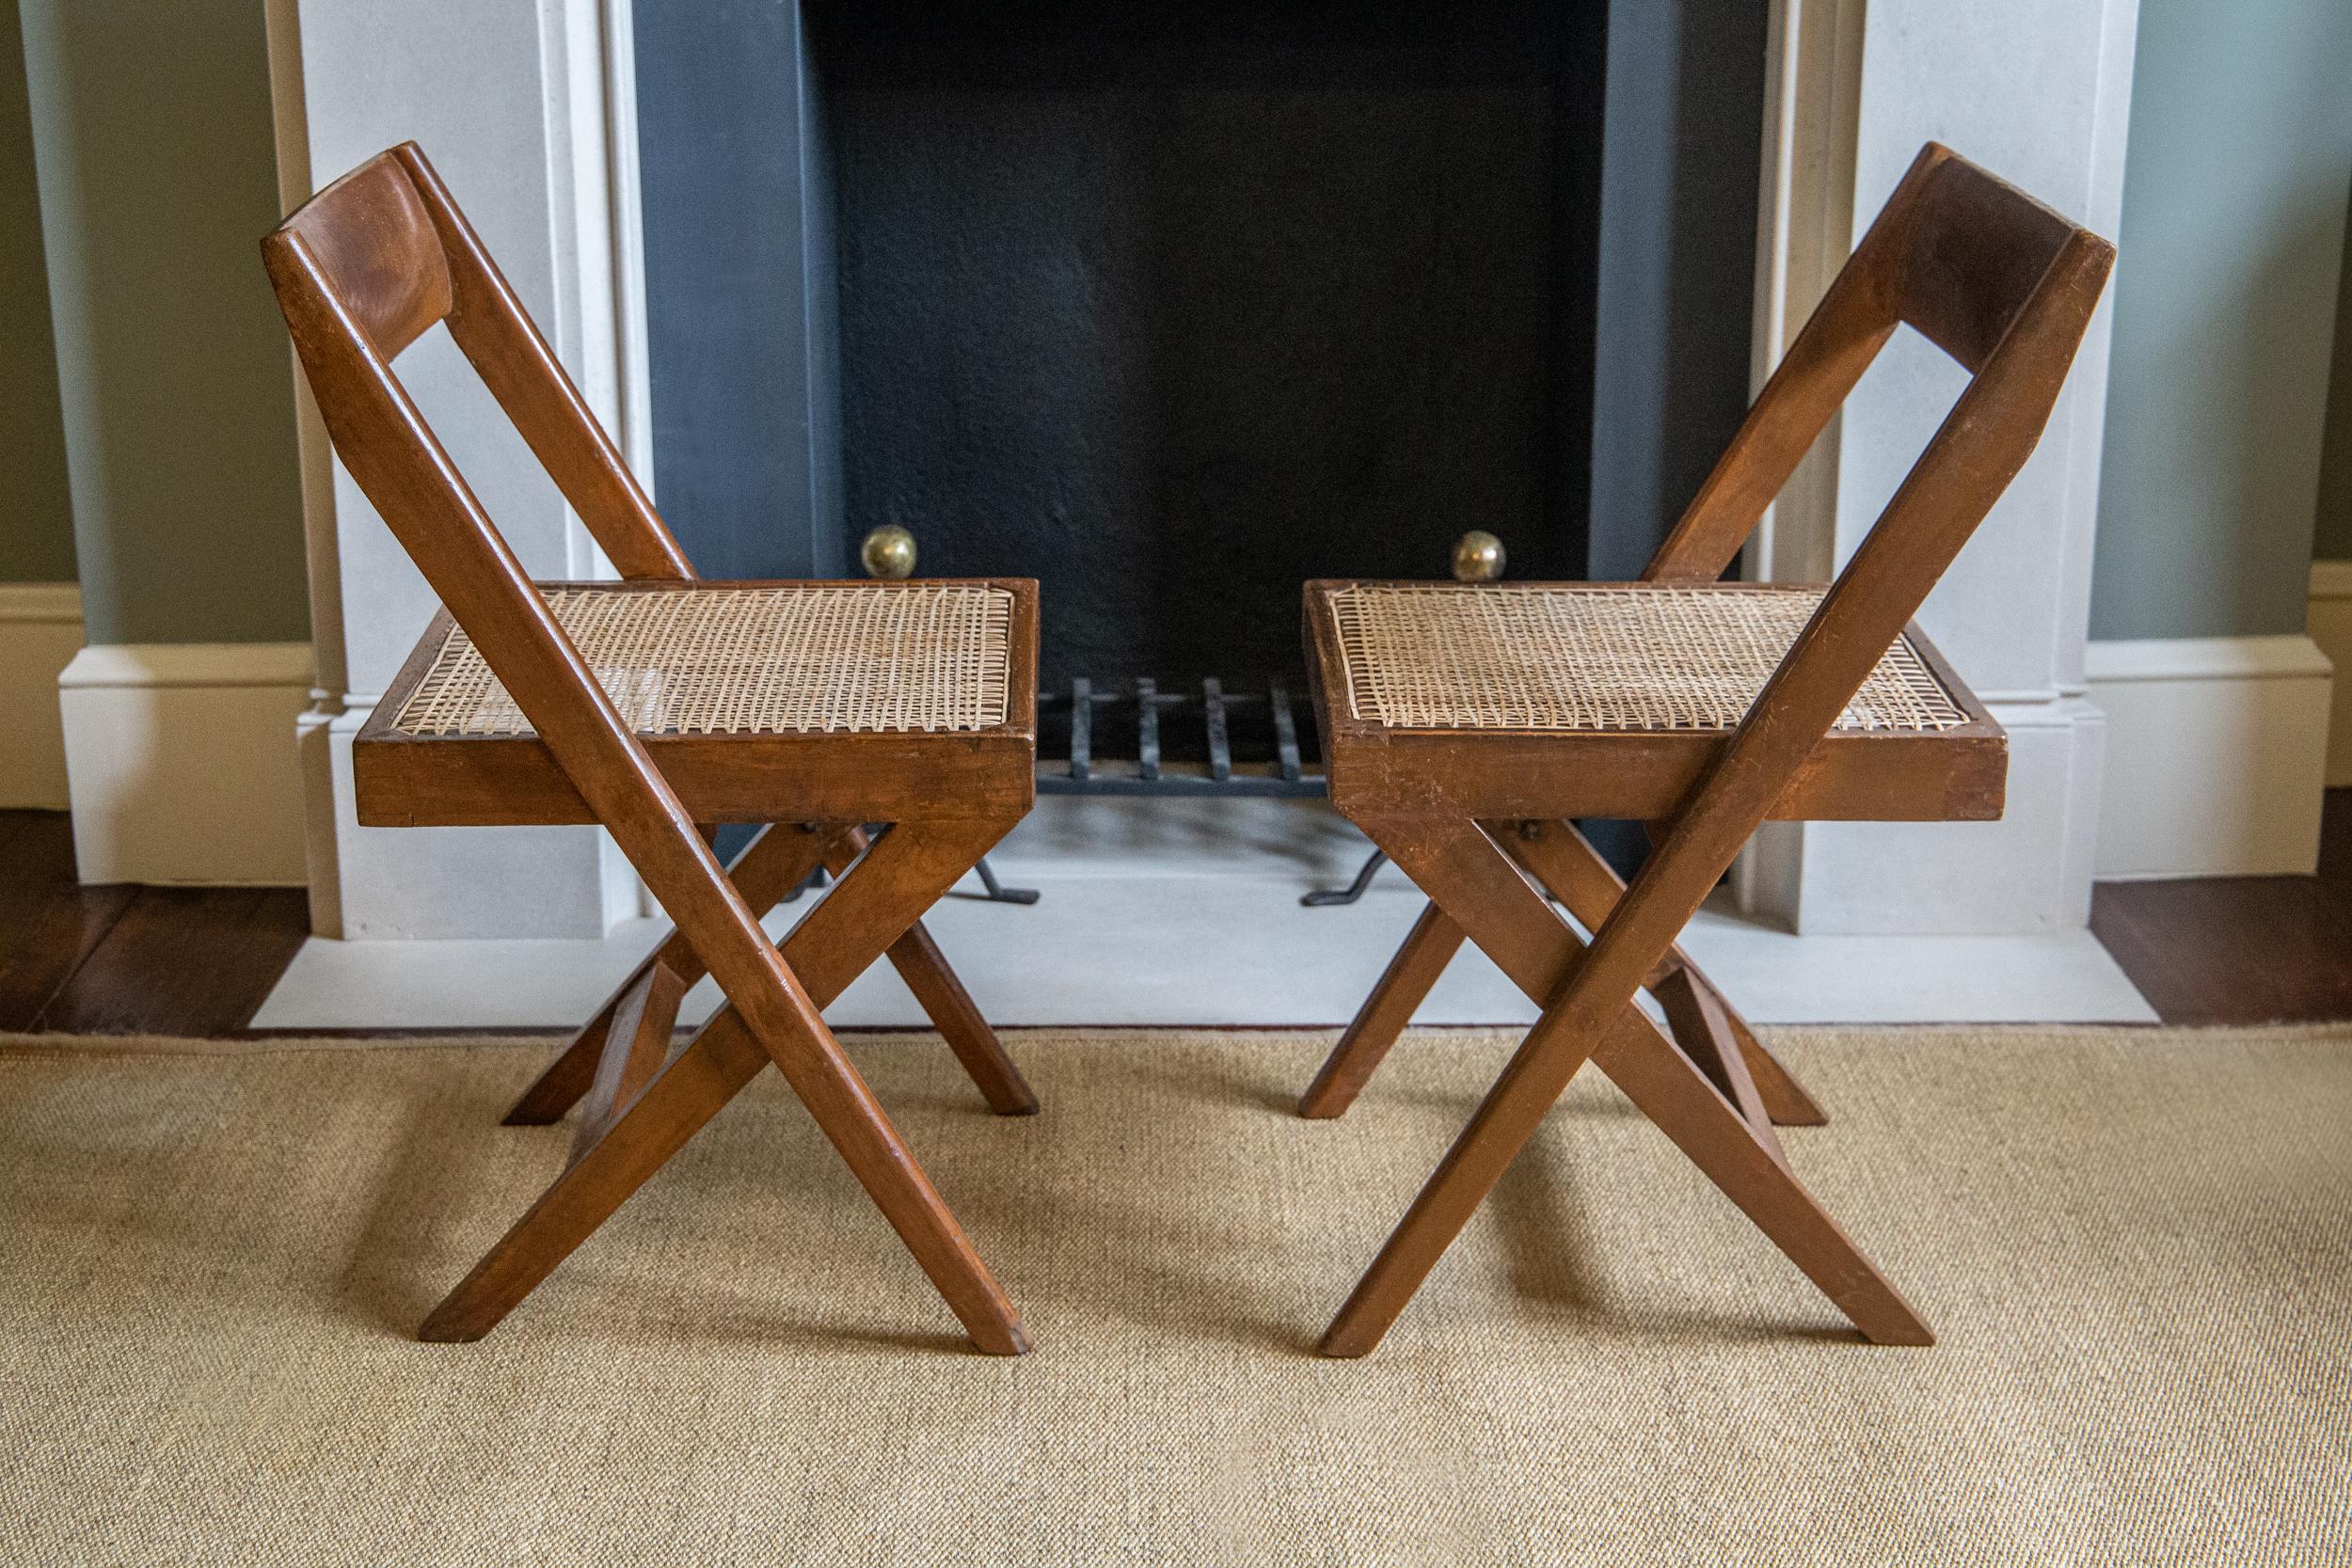 Four X Frame Chairs by Pierre Jeanneret & Eulie Chowdhury, Chandigarh India 1959 For Sale 3